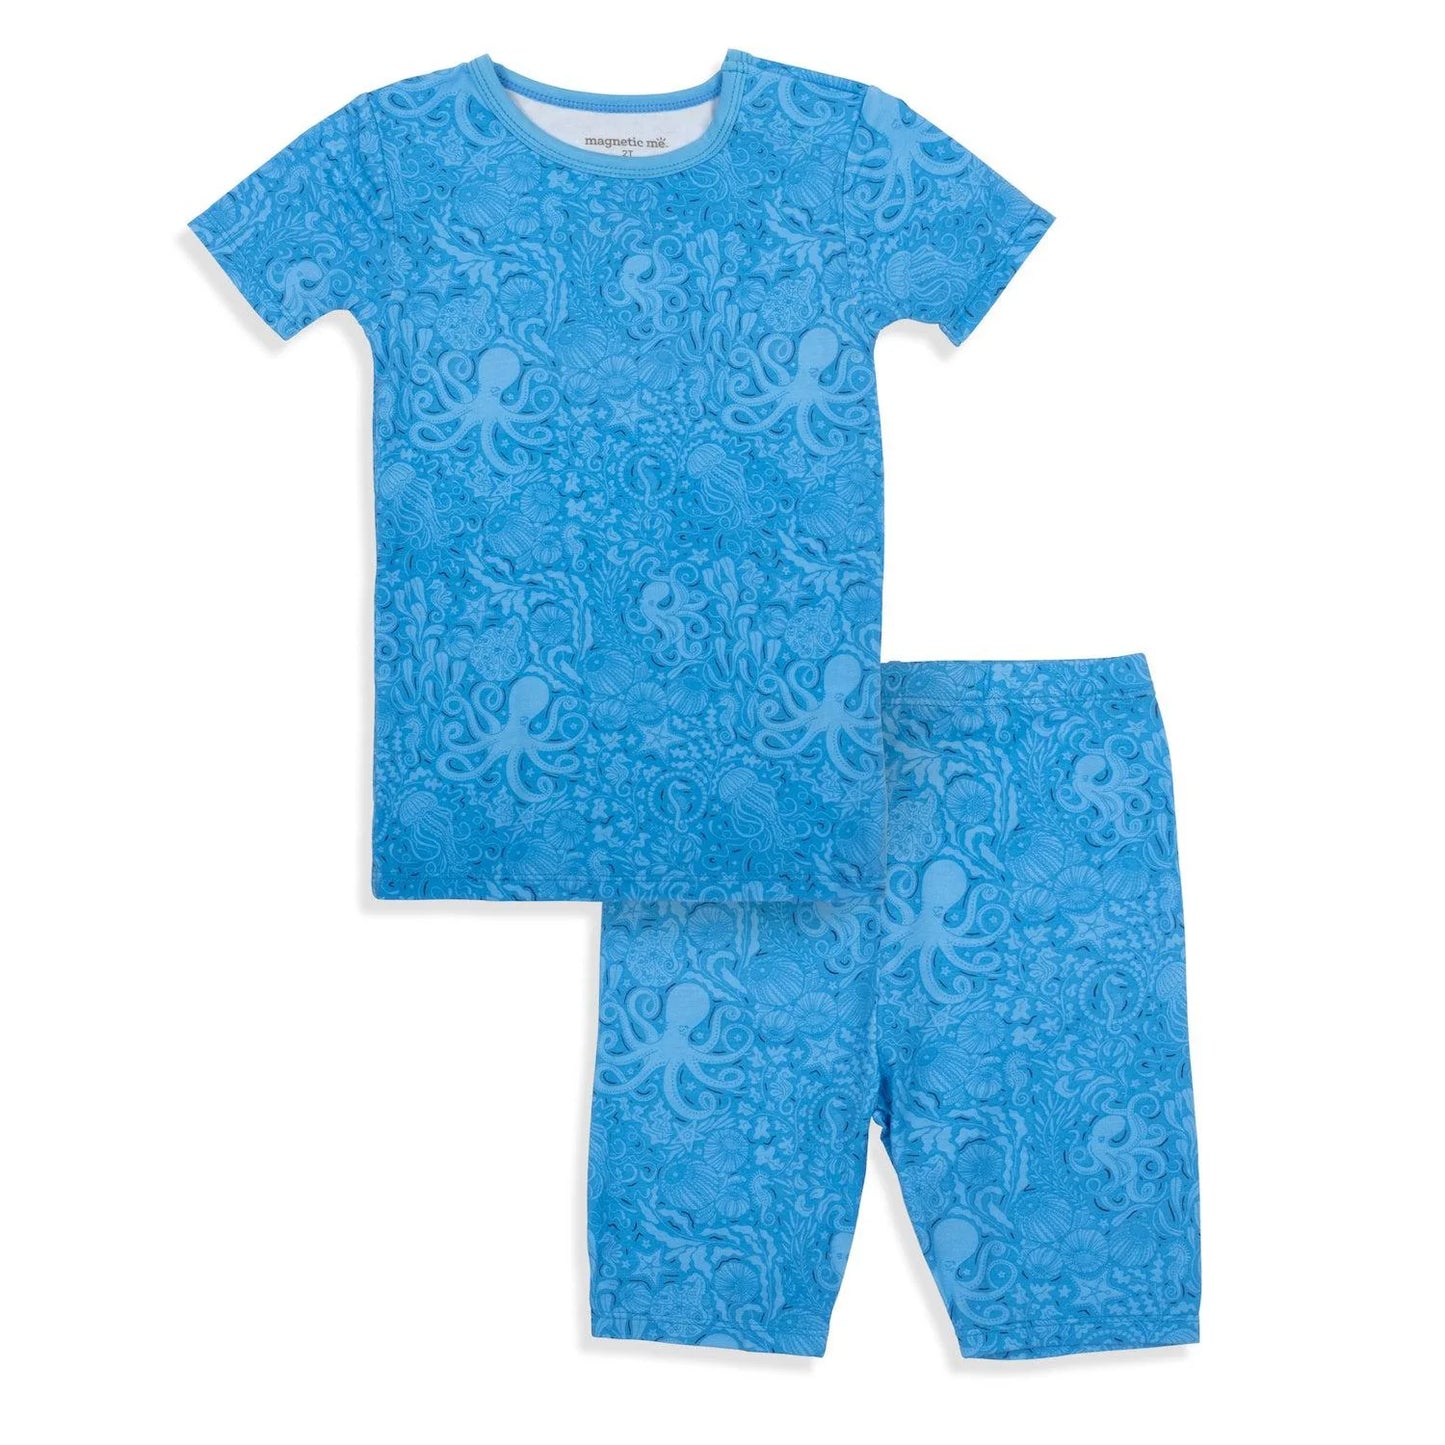 2 Piece Pajama (Short Sleeve) - Seas the Day Magnetic (Blue)